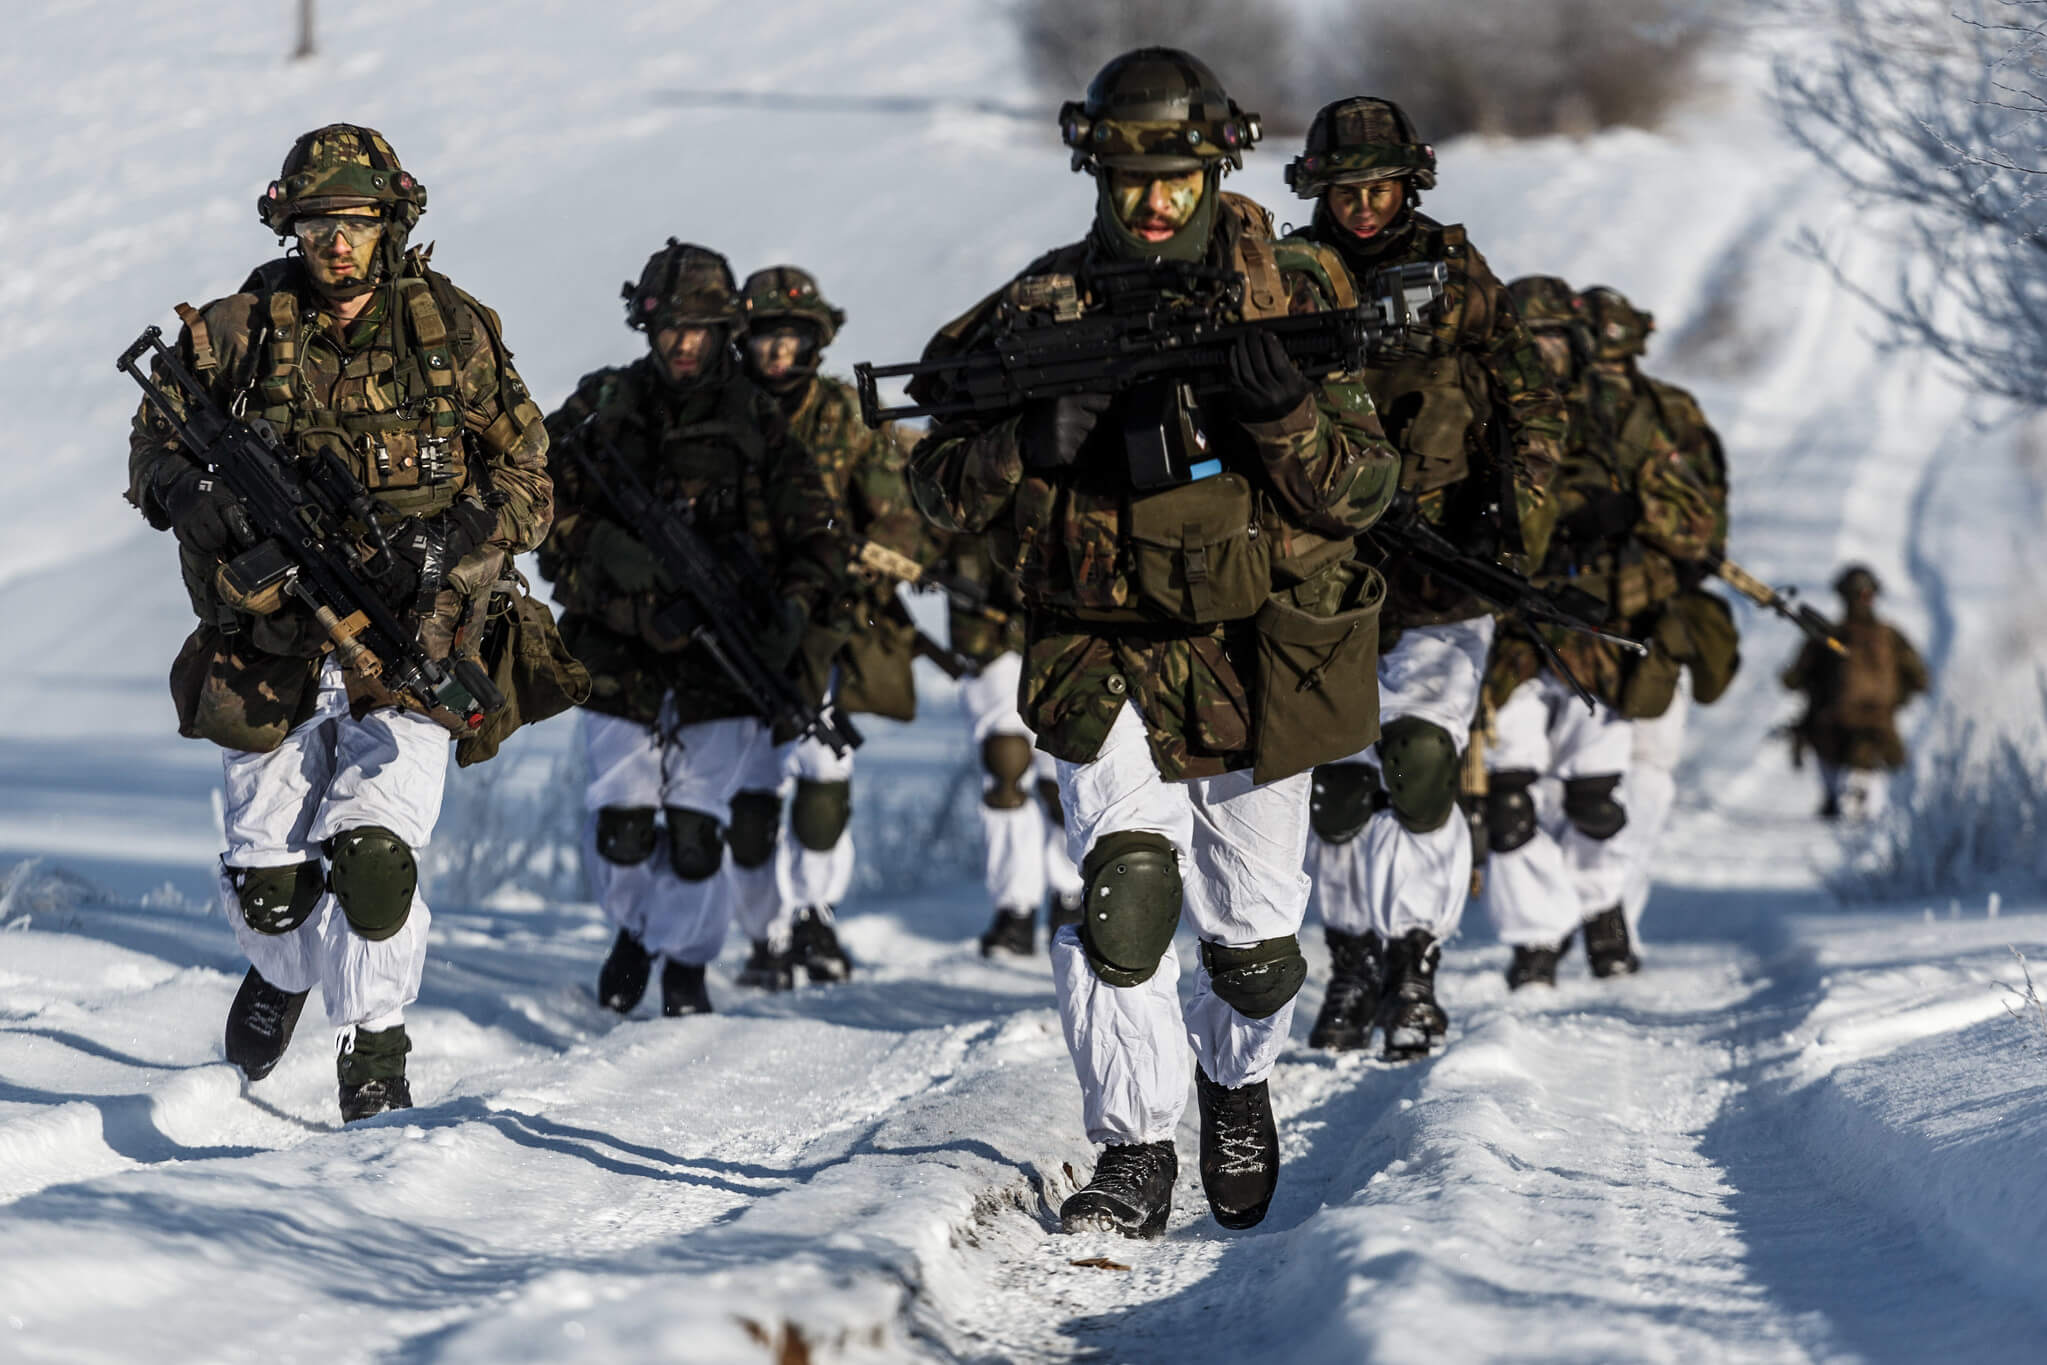 Boxhoorn-Dutch soldiers march through the Lithuanian countryside during Exercise Scorpion Strike, held by NATO forces in Lithuania on Feb. 21, 2018. NATO